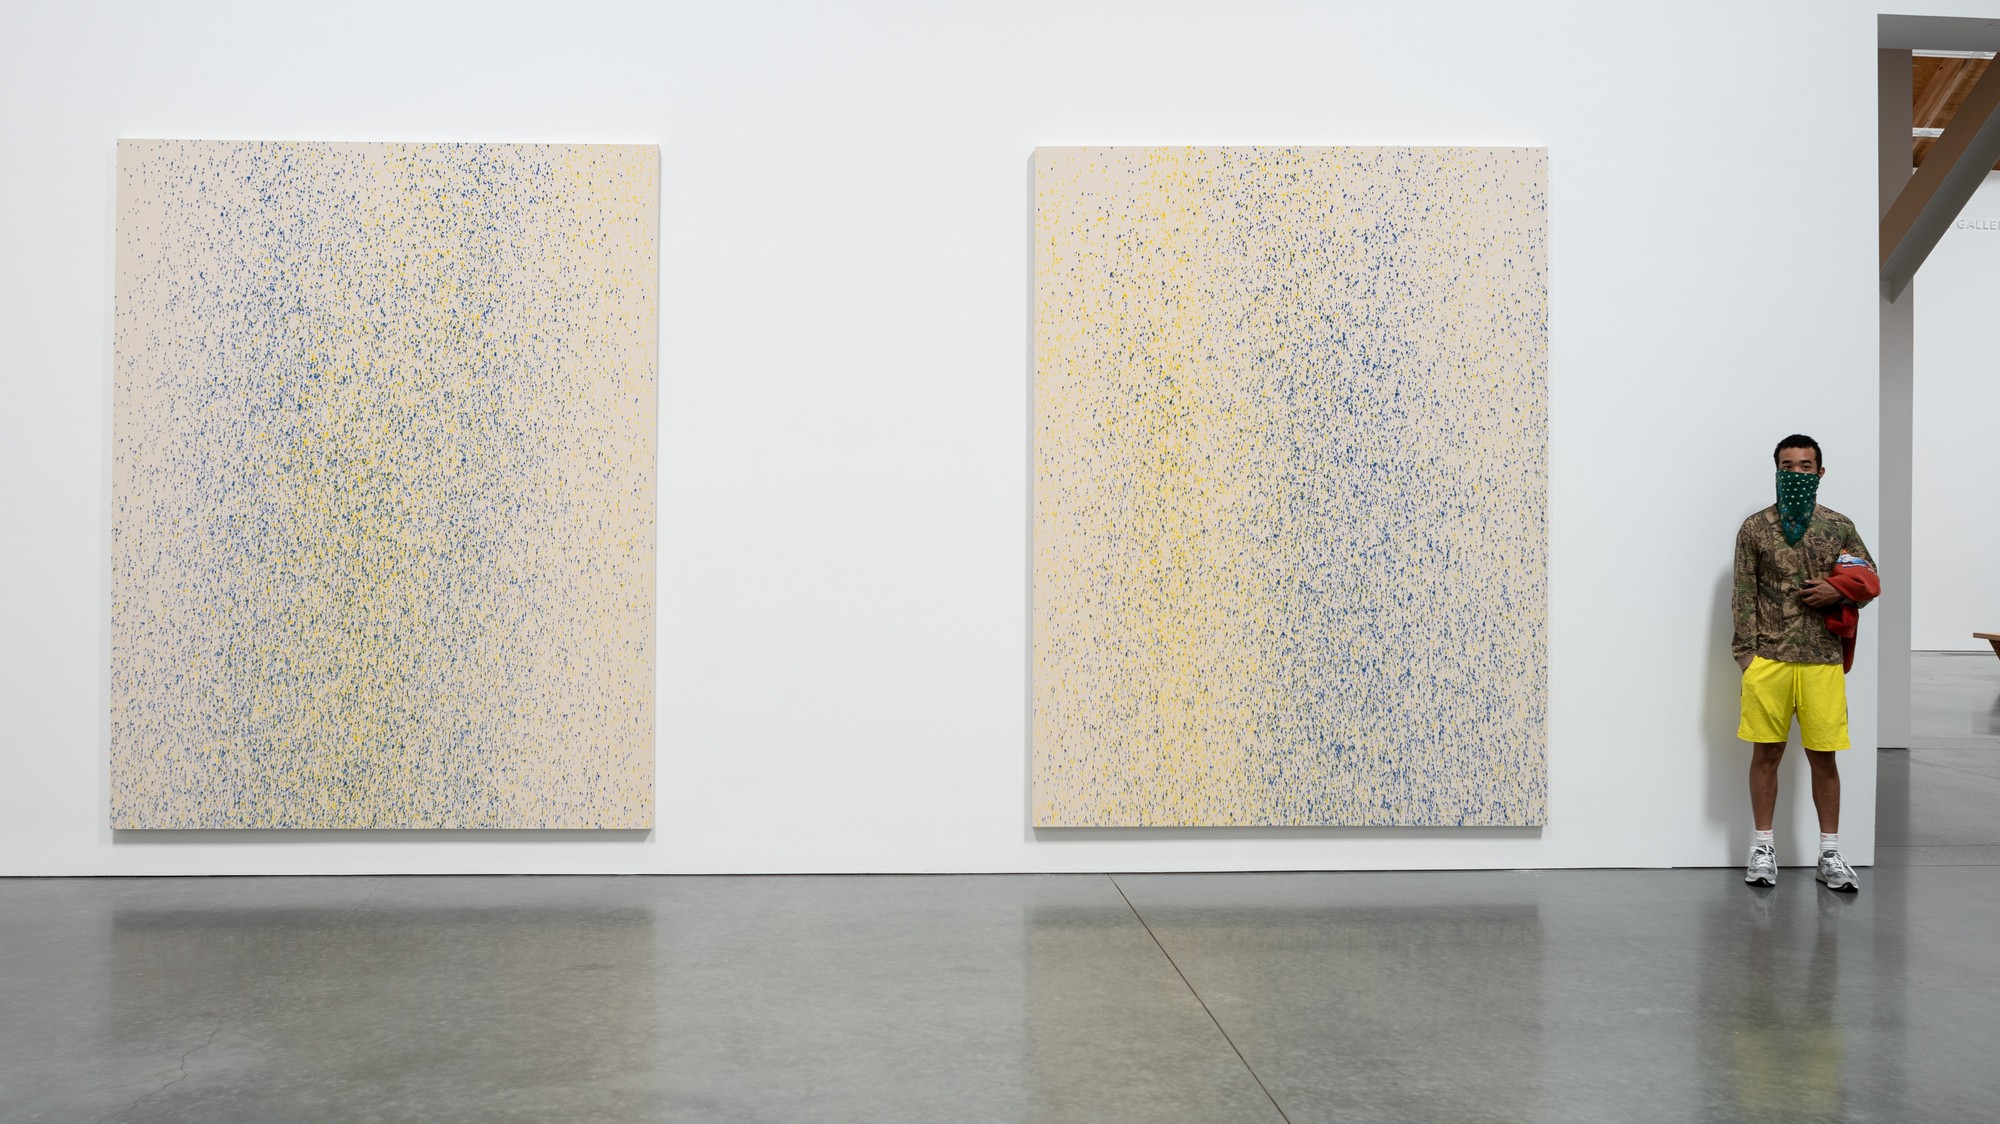 Lucien Smith (American, born 1989), Installation view of the exhibition Southampton Suite at the Parrish Art Museum, Water Mill, NY. 10 works, LSMI – 1–10, (Blue & Yellow). Acrylic and unprimed canvas, 108 x 84 inches. Photo: Gary Mamay